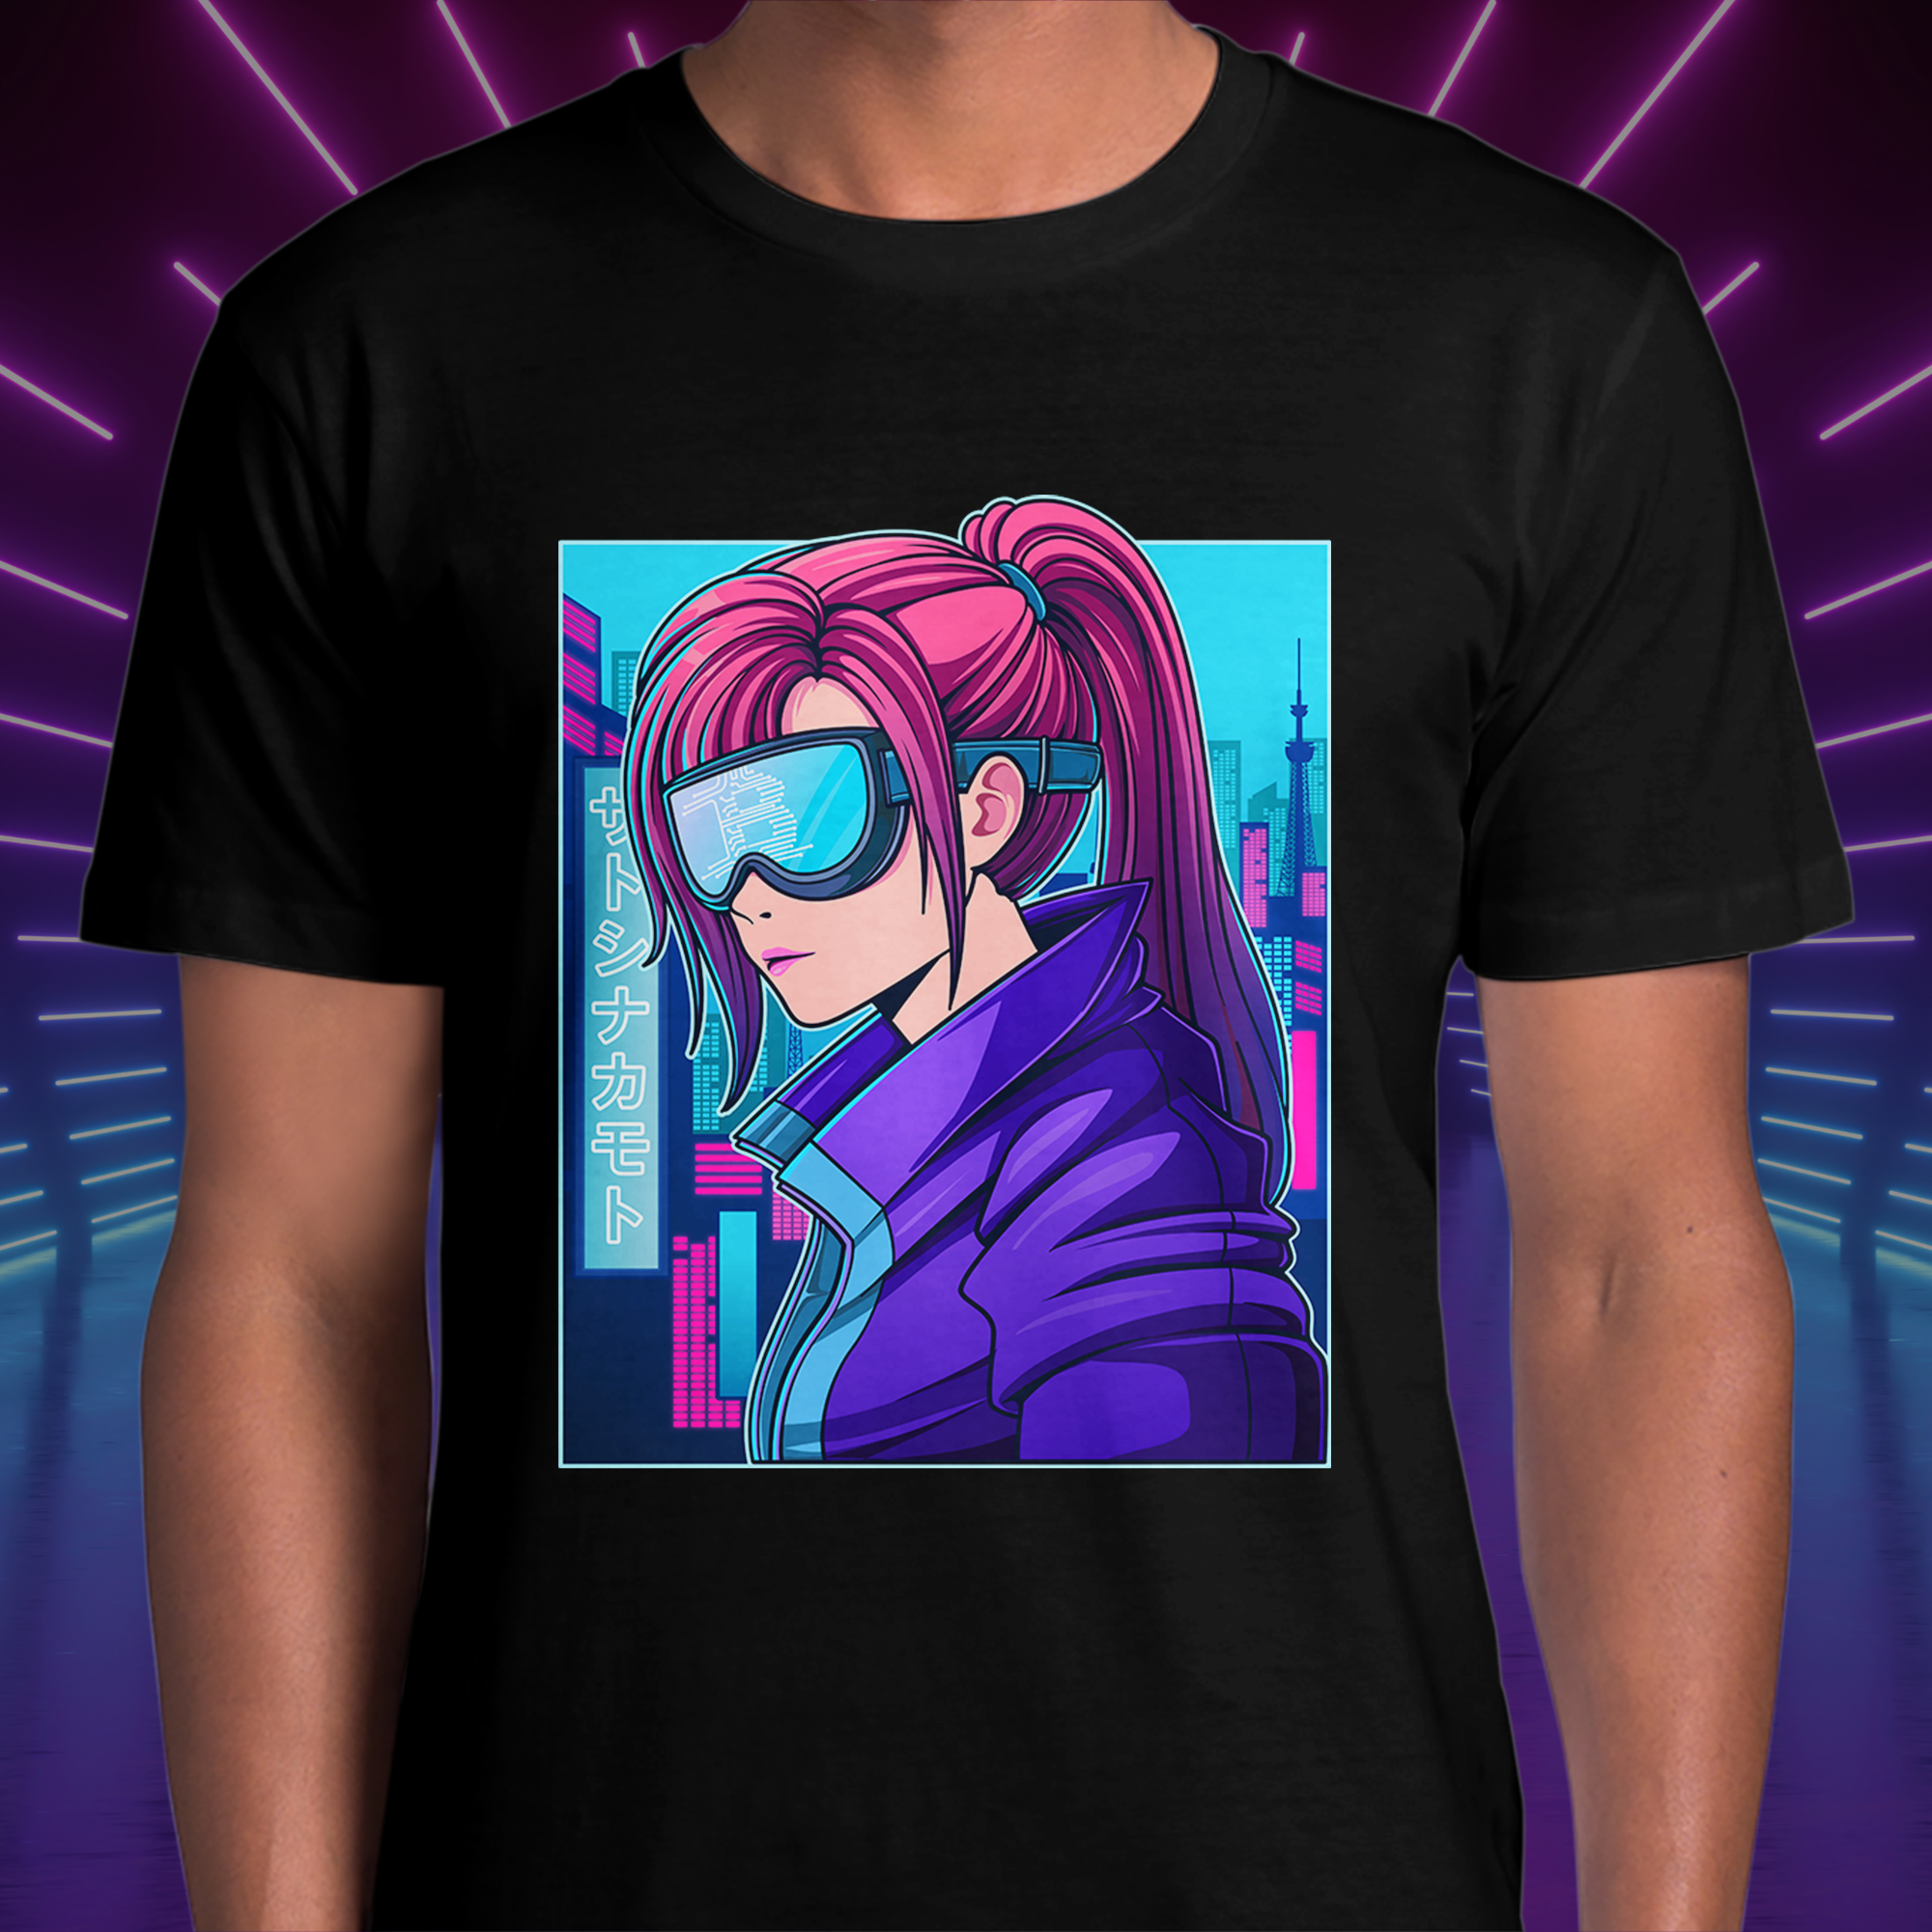 BTC & Anime Shirt - The Future Is Bitcoin T-Shirt. Model image (front view).